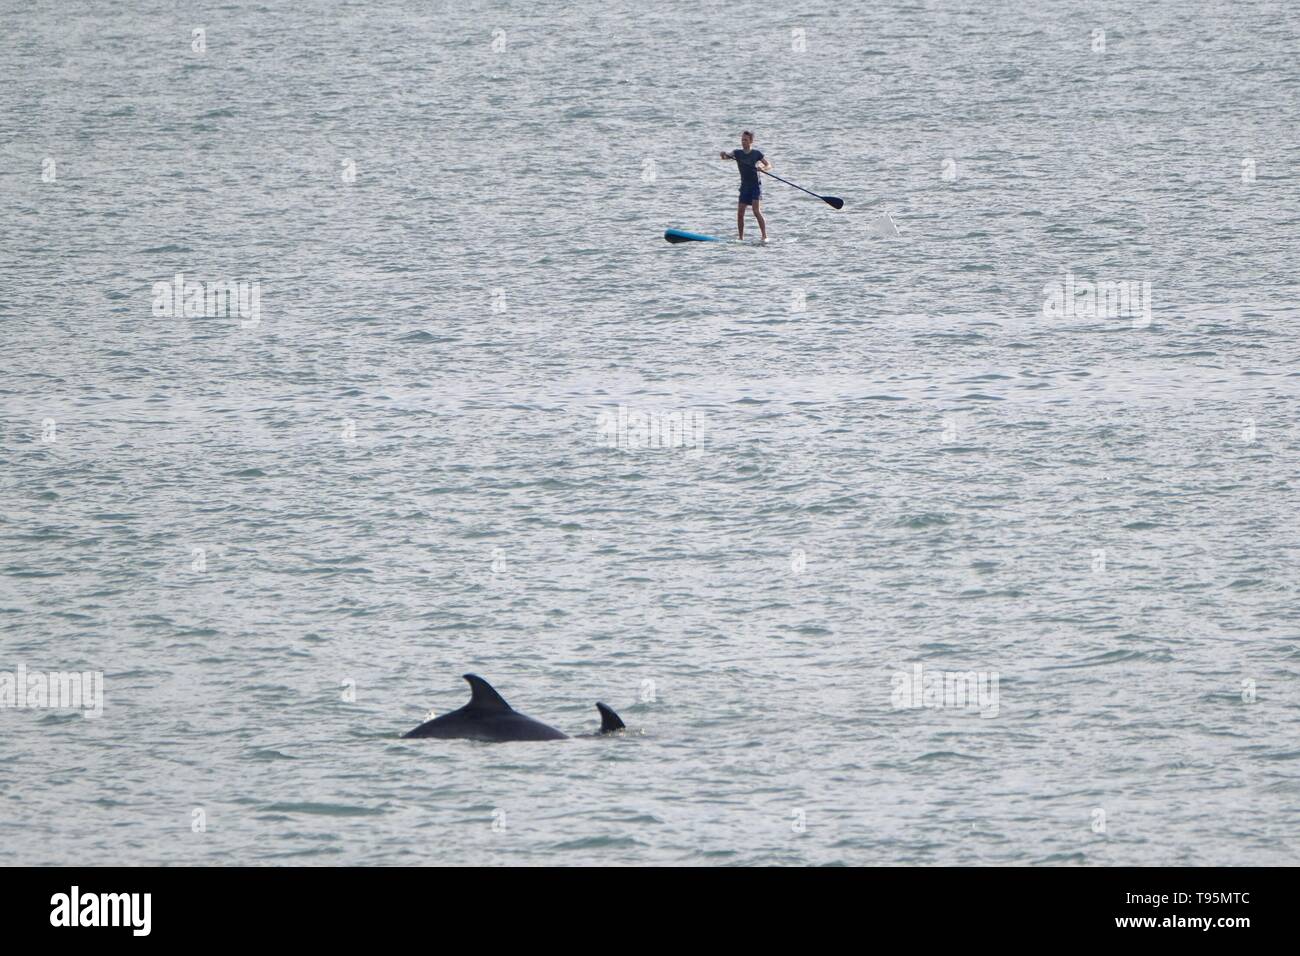 Aberystwyth Wales Uk. Thursday 16 May 2019 UK weather: A lone paddle boarder gets a close encounter with a pair of dolphins in the sea off Aberystwyth beach on a warm May evening. photo Credit: Keith Morris/Alamy Live News Stock Photo